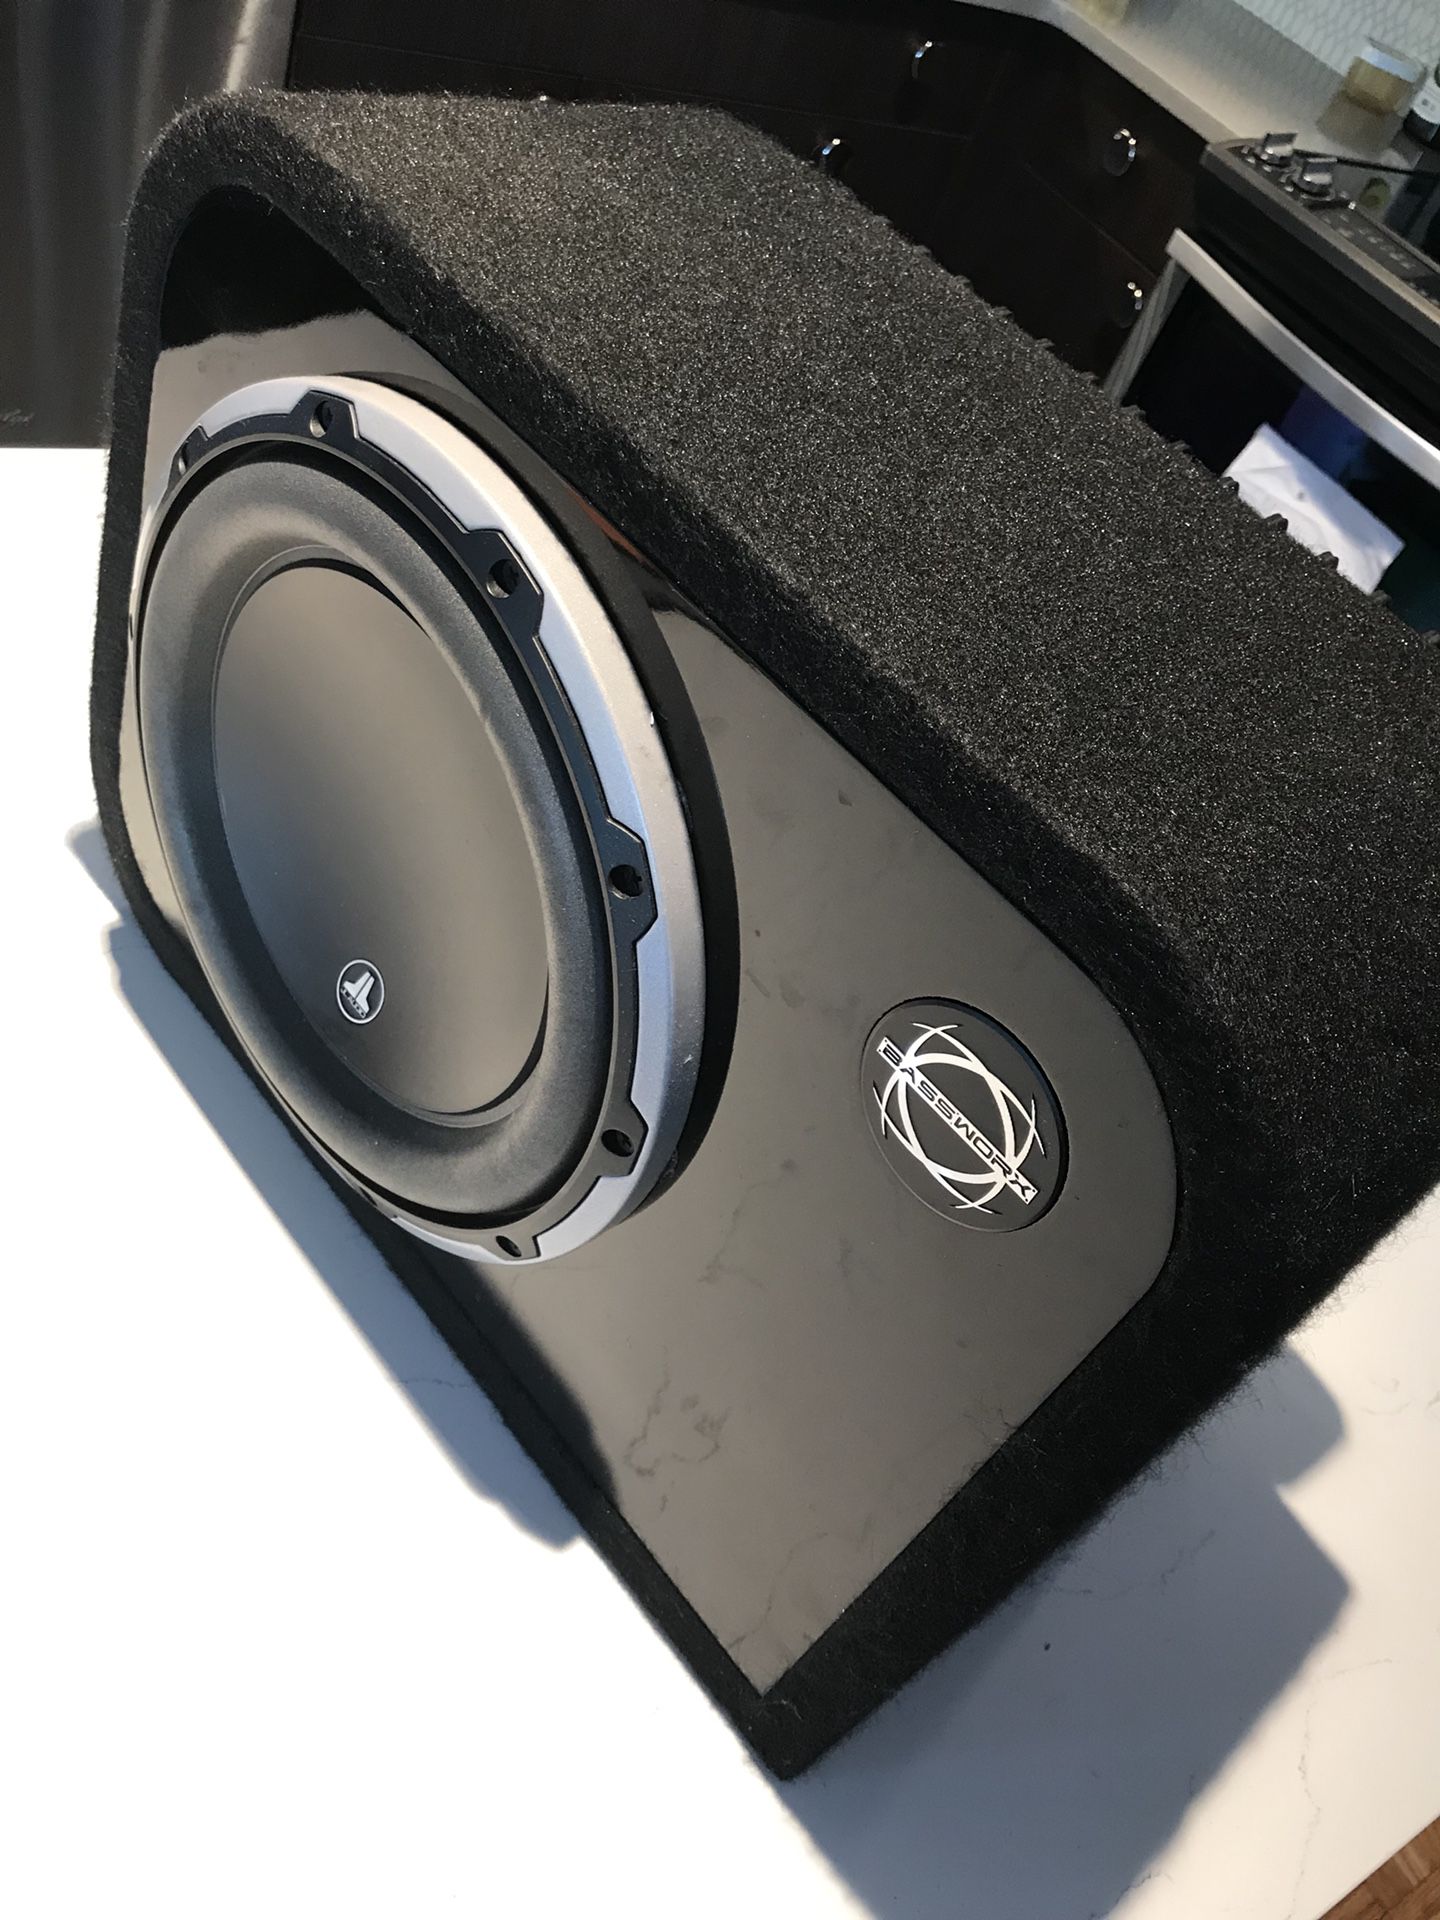 JL Audio sub woofer 10” top of the line driver and Amplifier